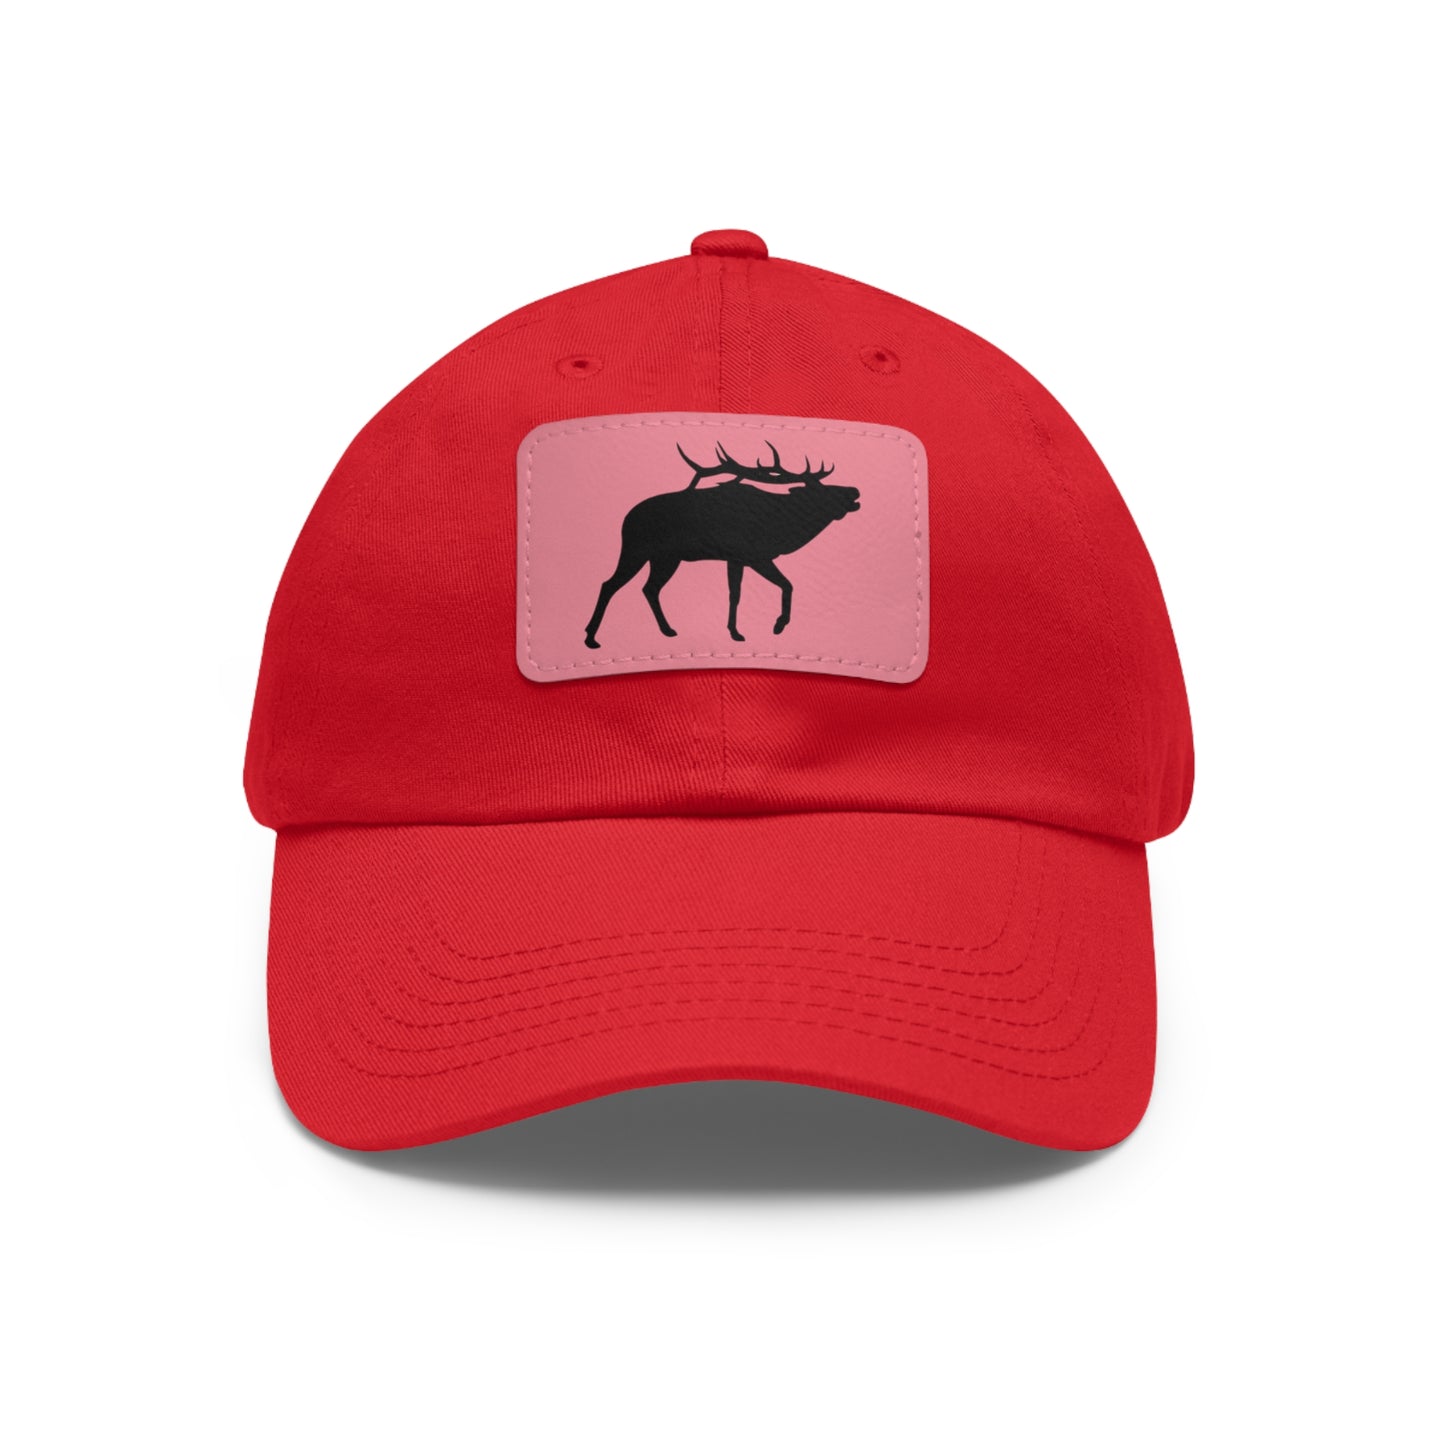 Elk hat with Leather Patch (Rectangle)